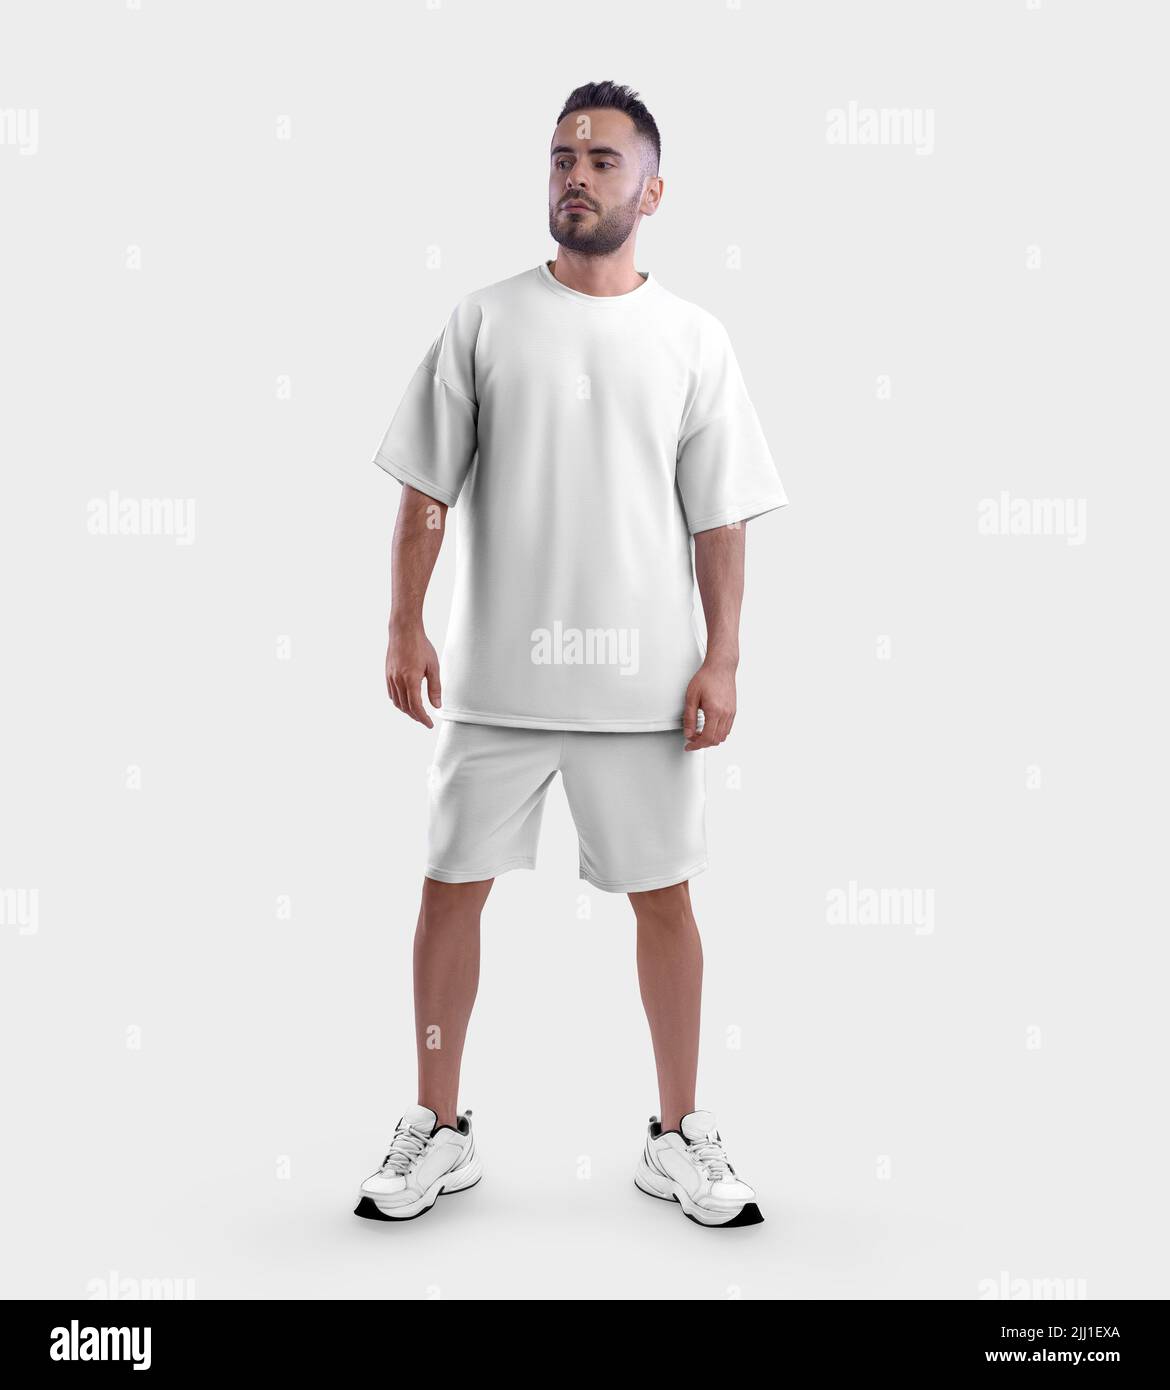 White suit mockup, oversized t-shirt, shorts on a guy in sneakers, front view, isolated on background. Fashion sportswear template, men's apparel for Stock Photo